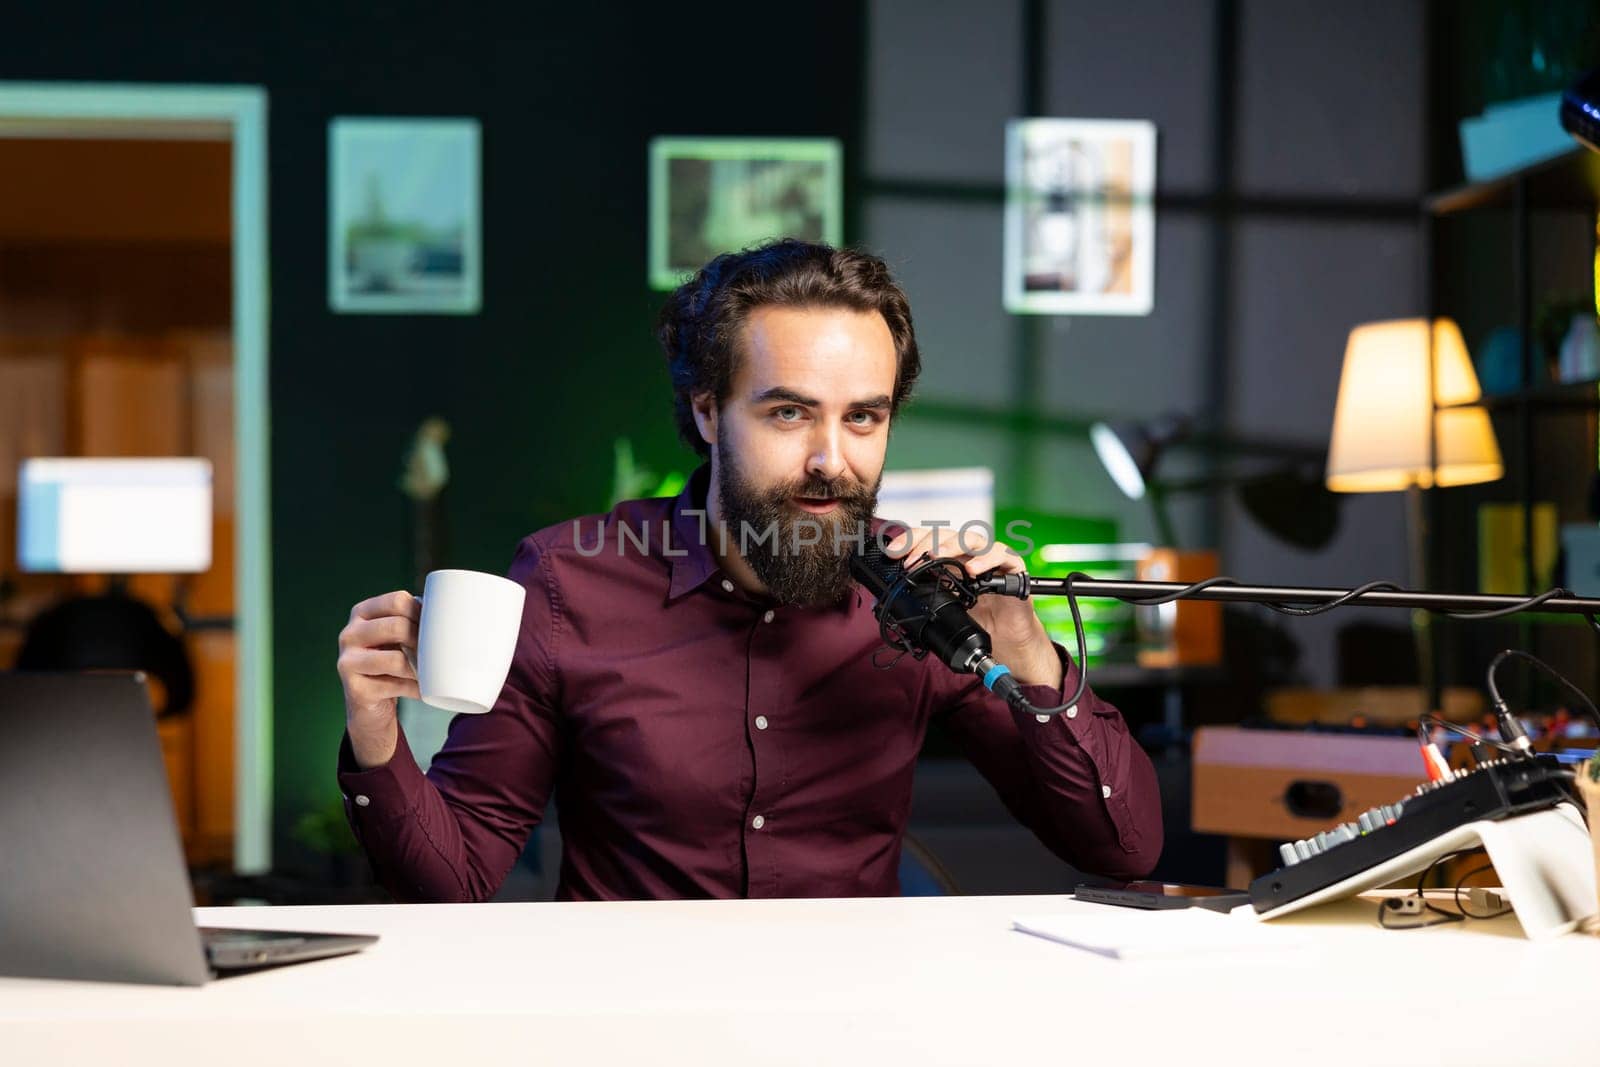 Media star talking in professional microphone in studio at night and drinking coffee, filming internet video production. Content creator uses quality mic to speak to audience, enjoying hot beverage